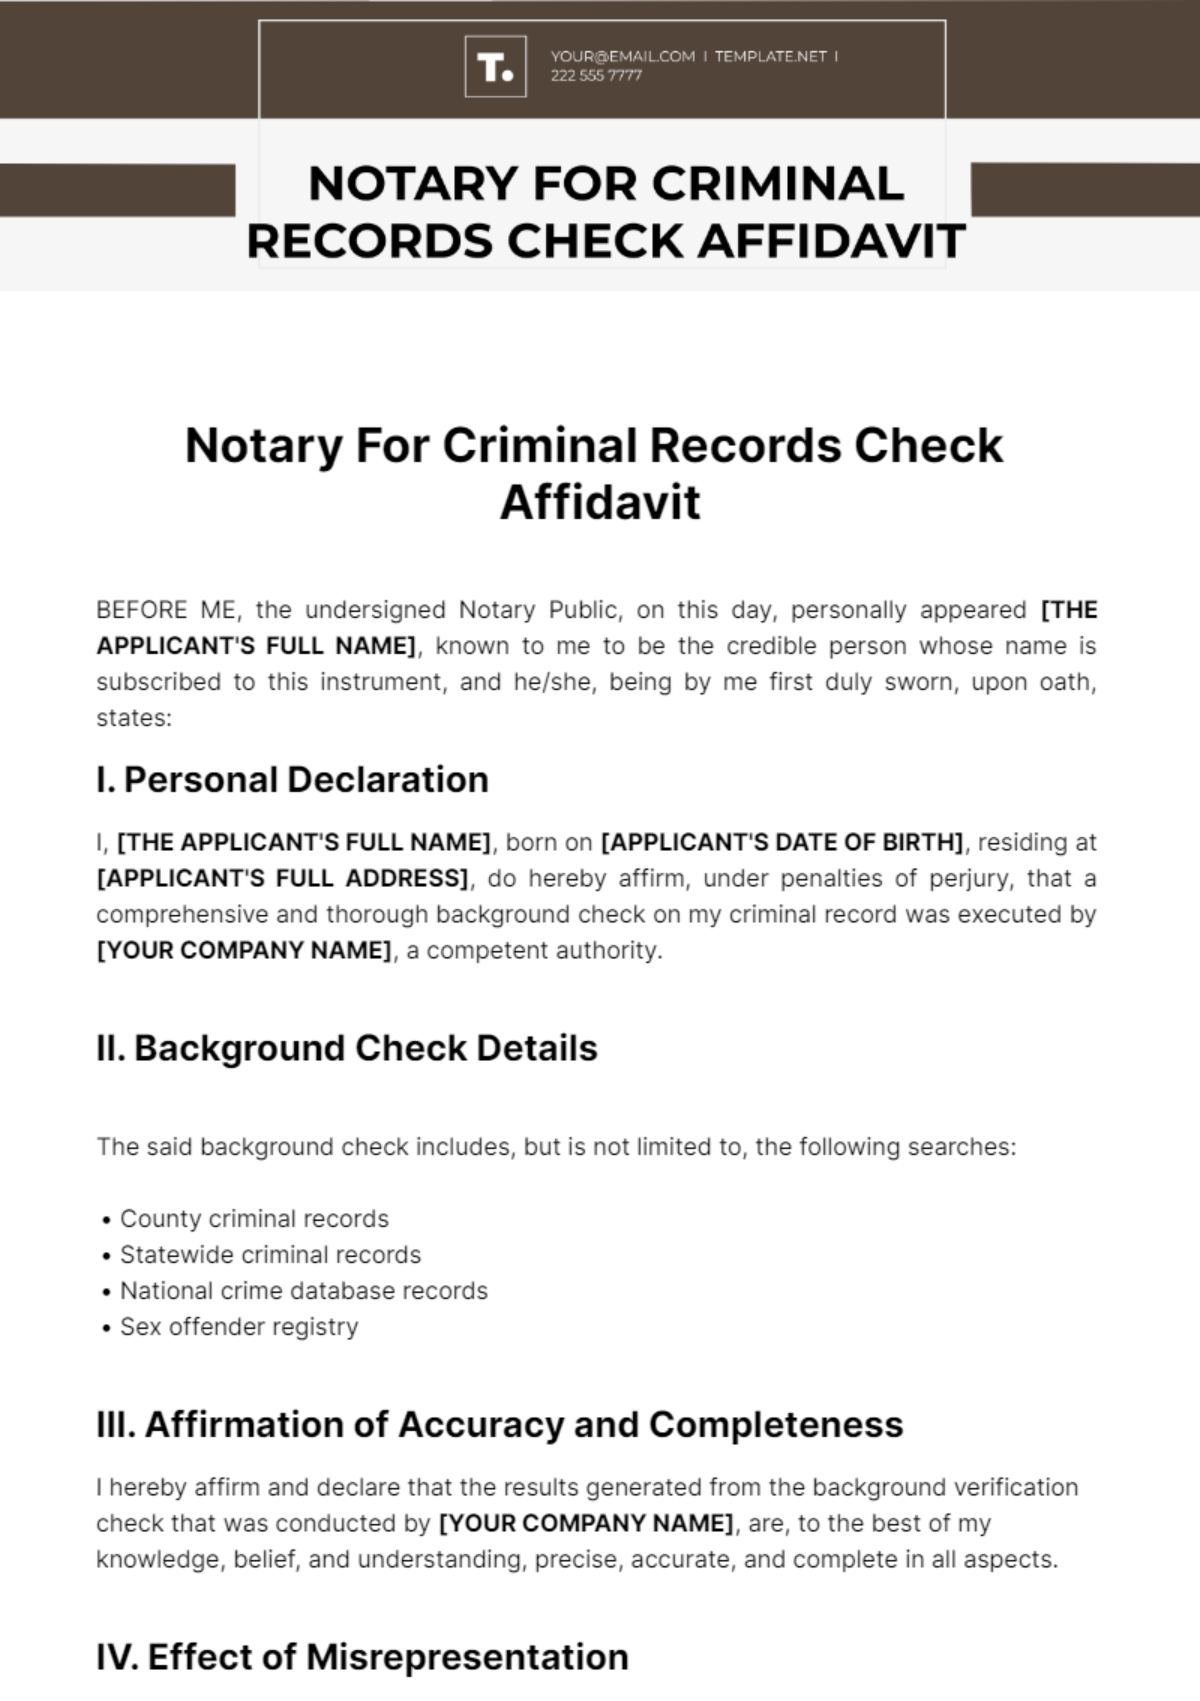 Notary For Criminal Records Check Affidavit Template